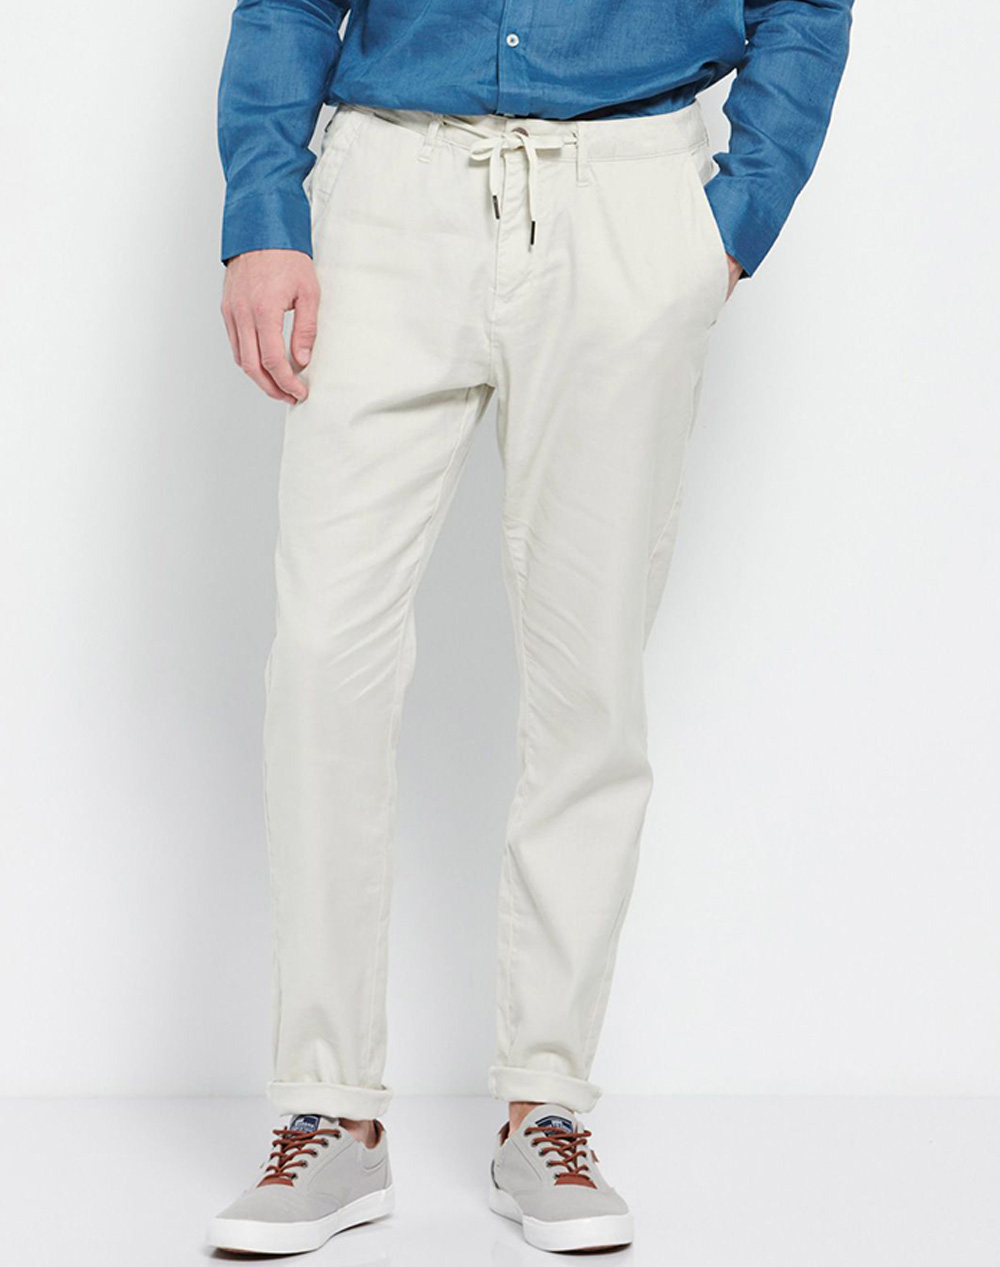 FUNKY BUDDHA Garment dyed λινό chino παντελόνι FBM007-011-02-SILVER OffWhite